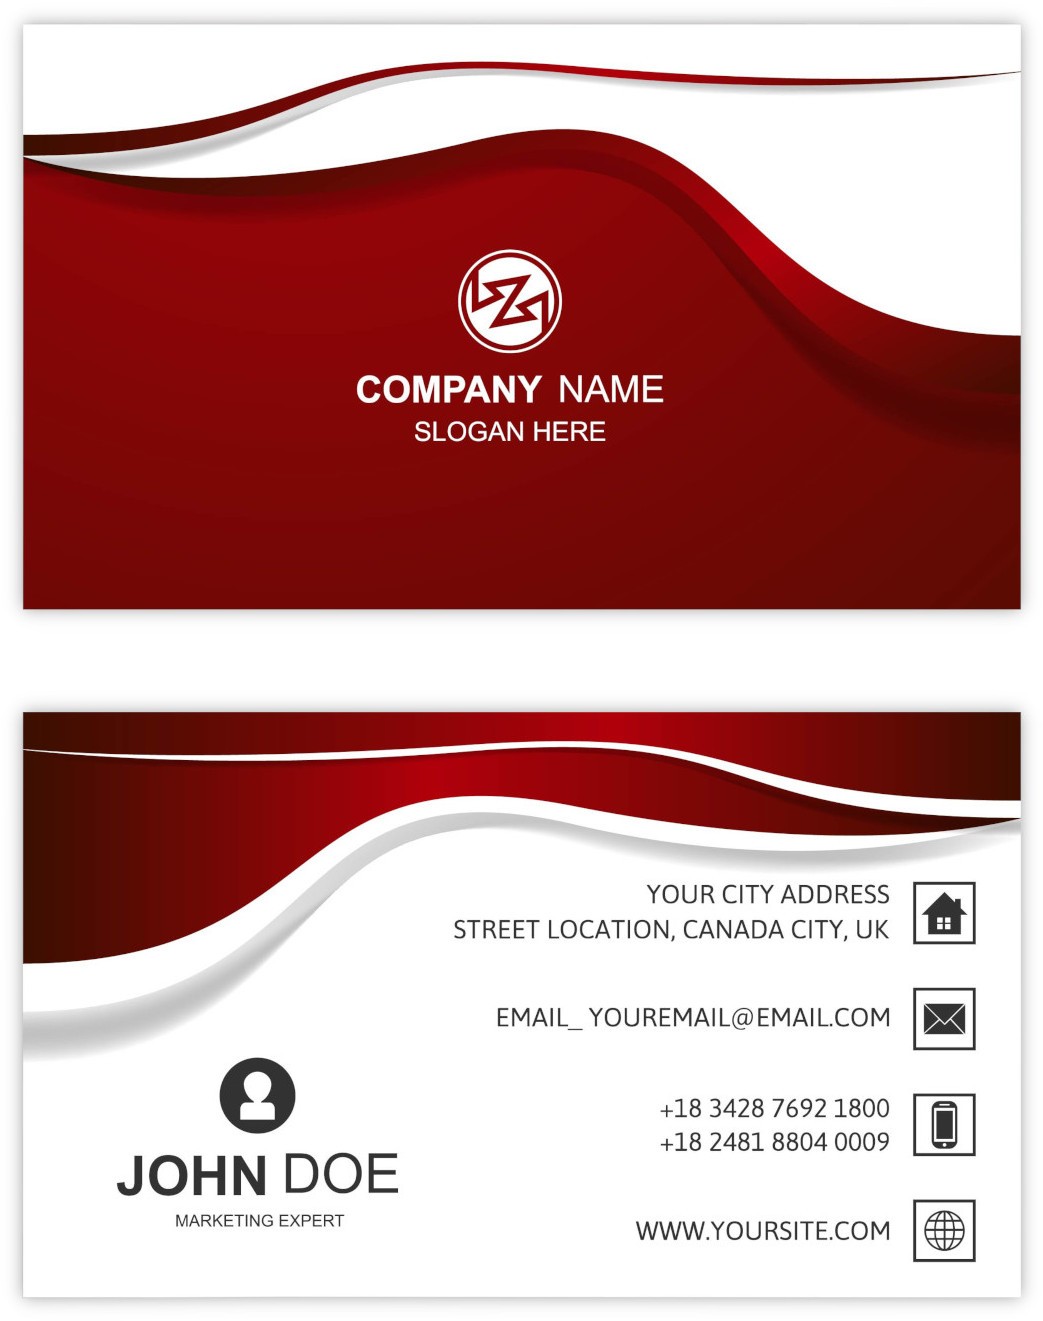 Augmented Reality Business Card - Business cards